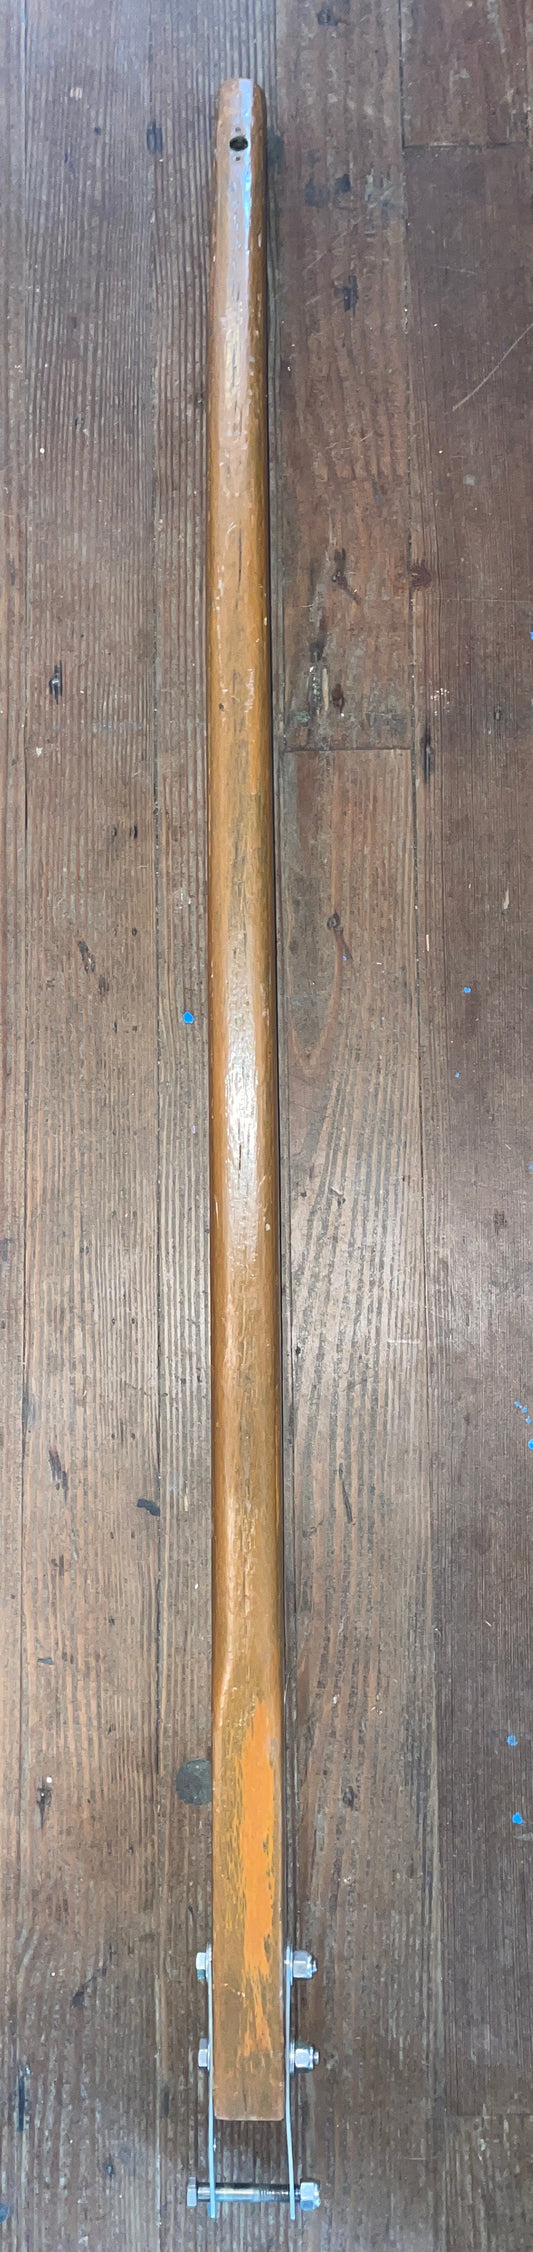 Wooden Curved Tiller Handle With Stainless Steel Hardware